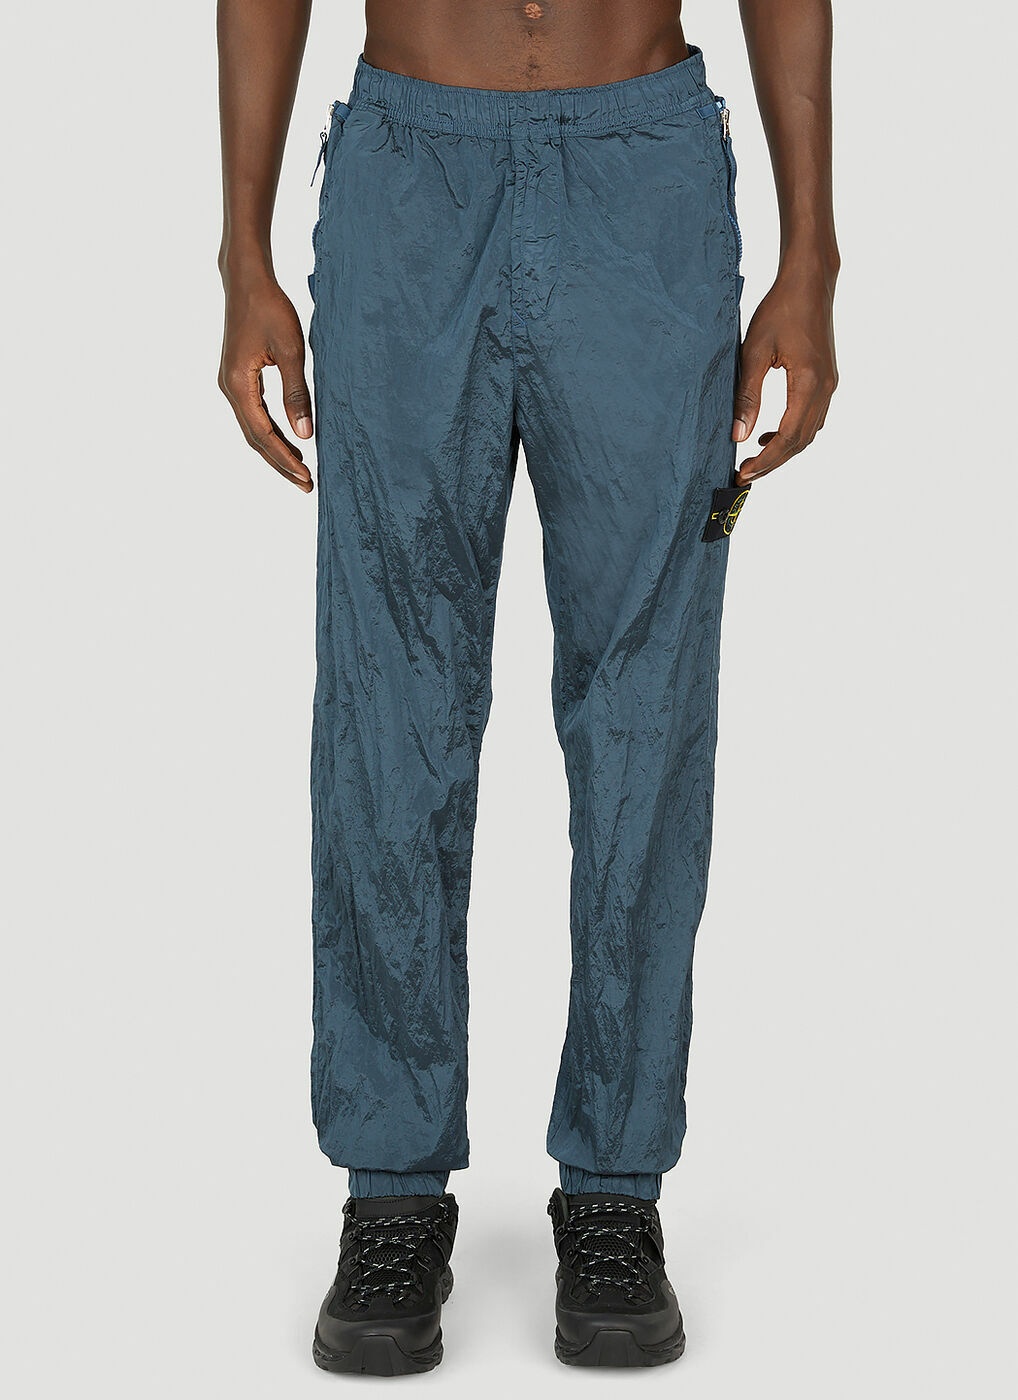 Stone Island - Compass Patch Track Pants in Blue Stone Island